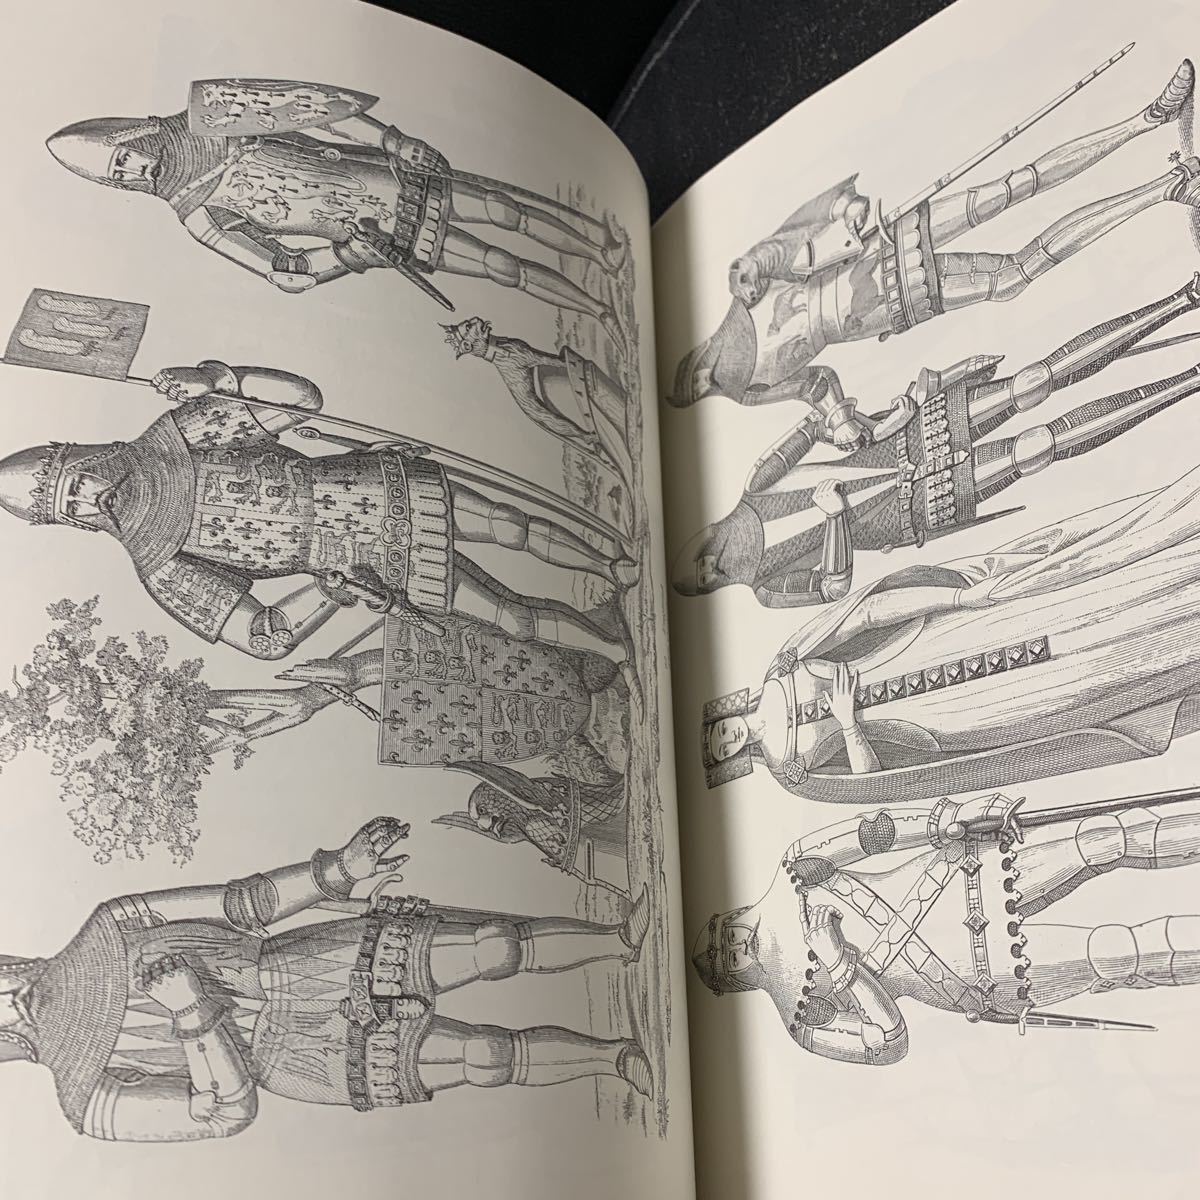 European Civil and Military Clothing　古代ヨーロッパイラスト 軍隊 鎧 甲冑 古代西洋_画像8